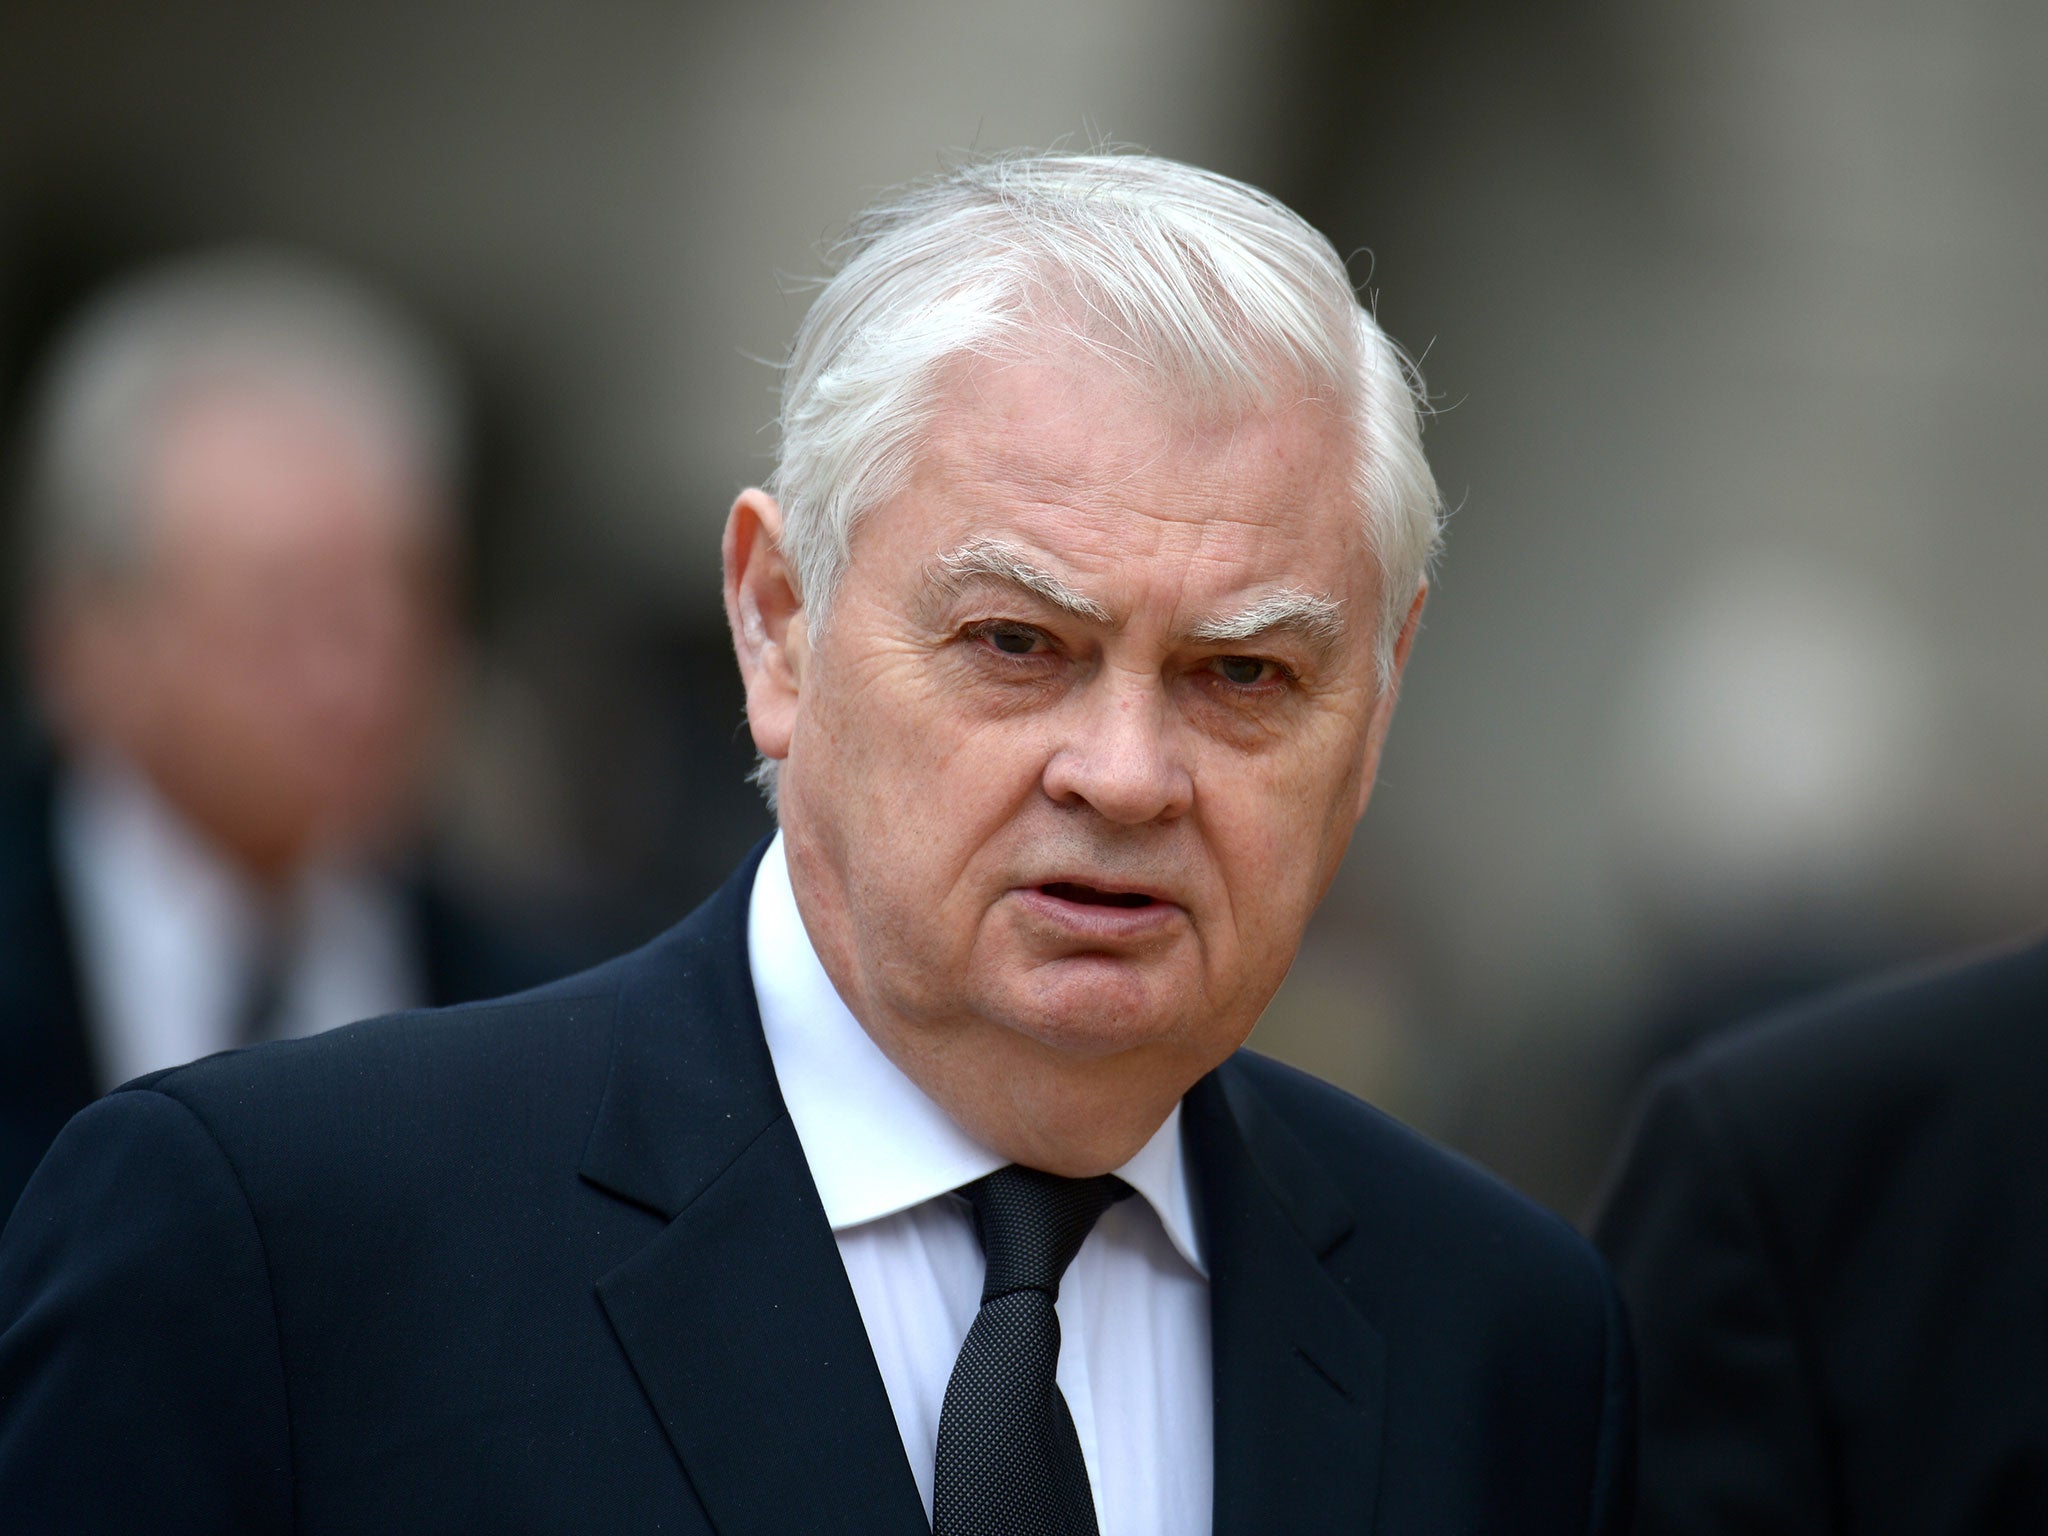 Lord Lamont is the new UK trade envoy